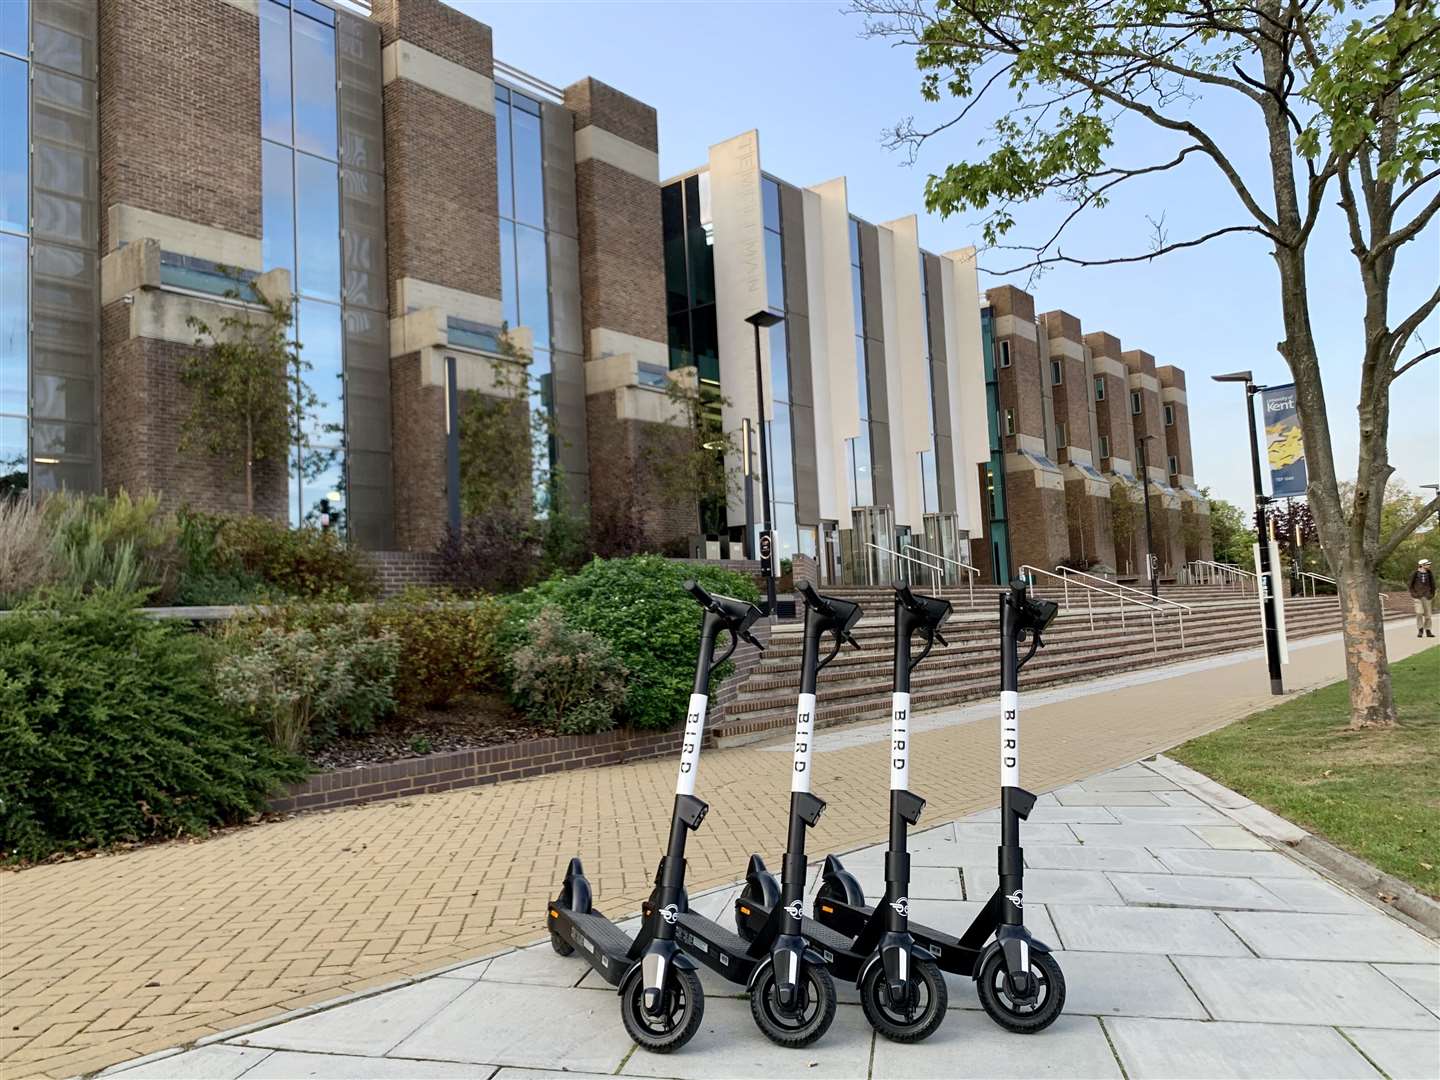 The Bird electric scooters at the University of Kent. Picture: Bird